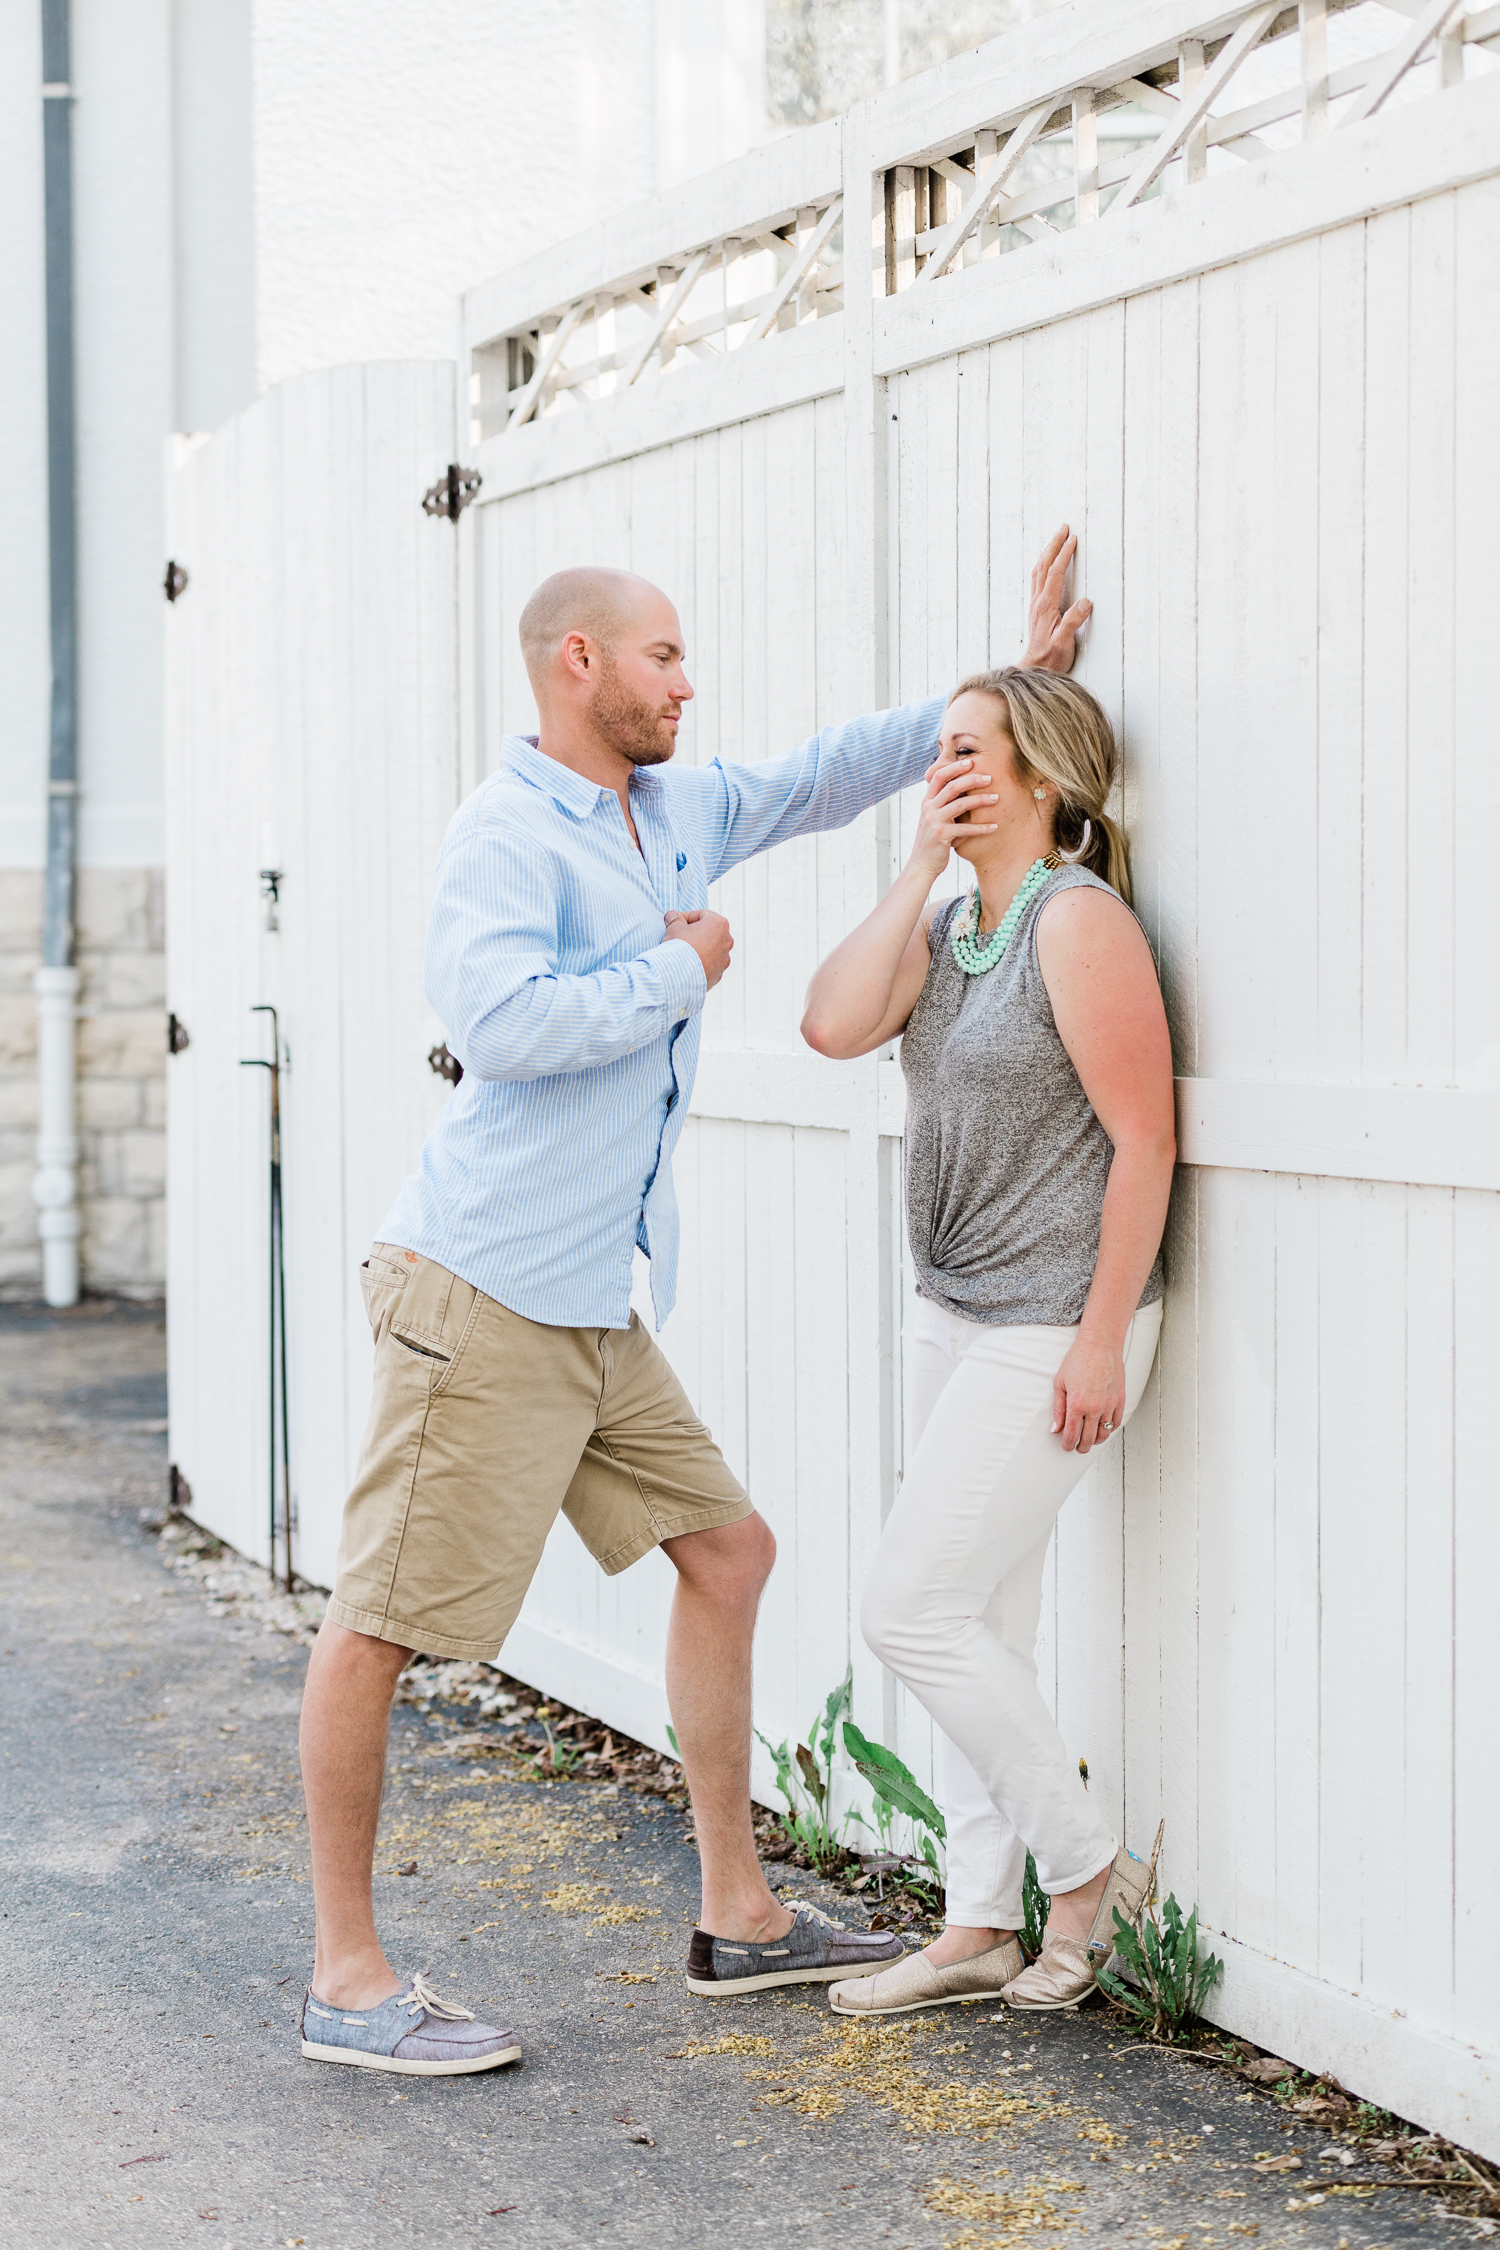 Fiance unbuttons light blue shirt in front of giggling fiance against a white wall